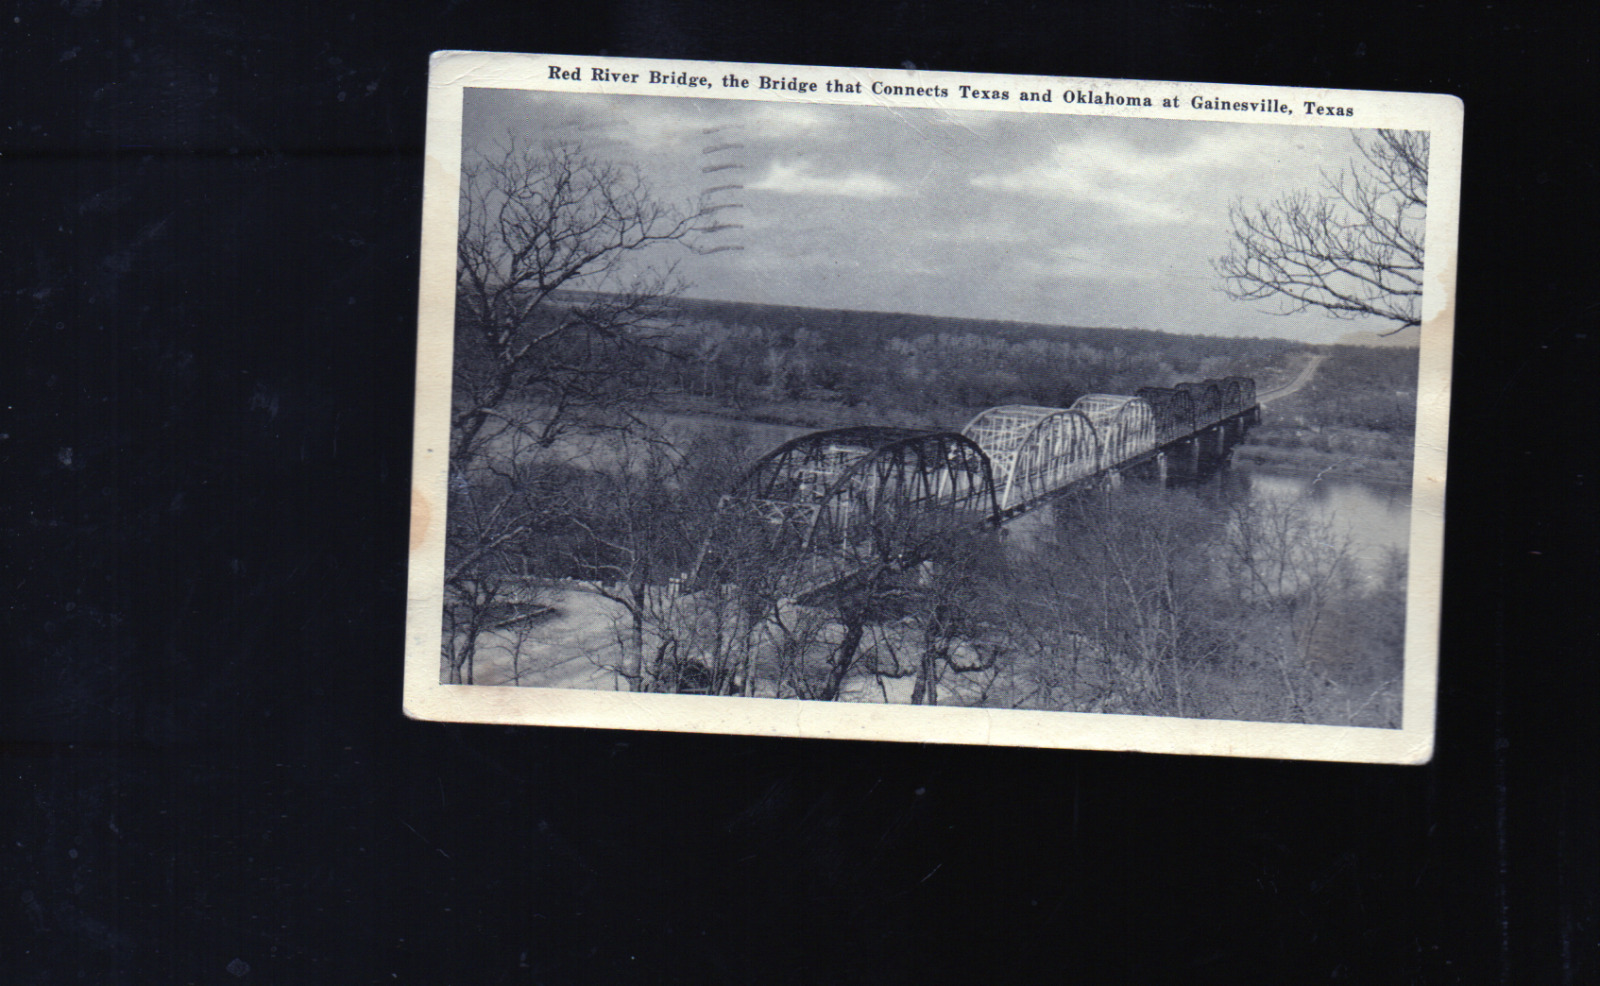 1947 RED RIVER BRIDGE CONNECTING  GAINESVILLE, TX & TACKERVILLE OK  POSTCARD